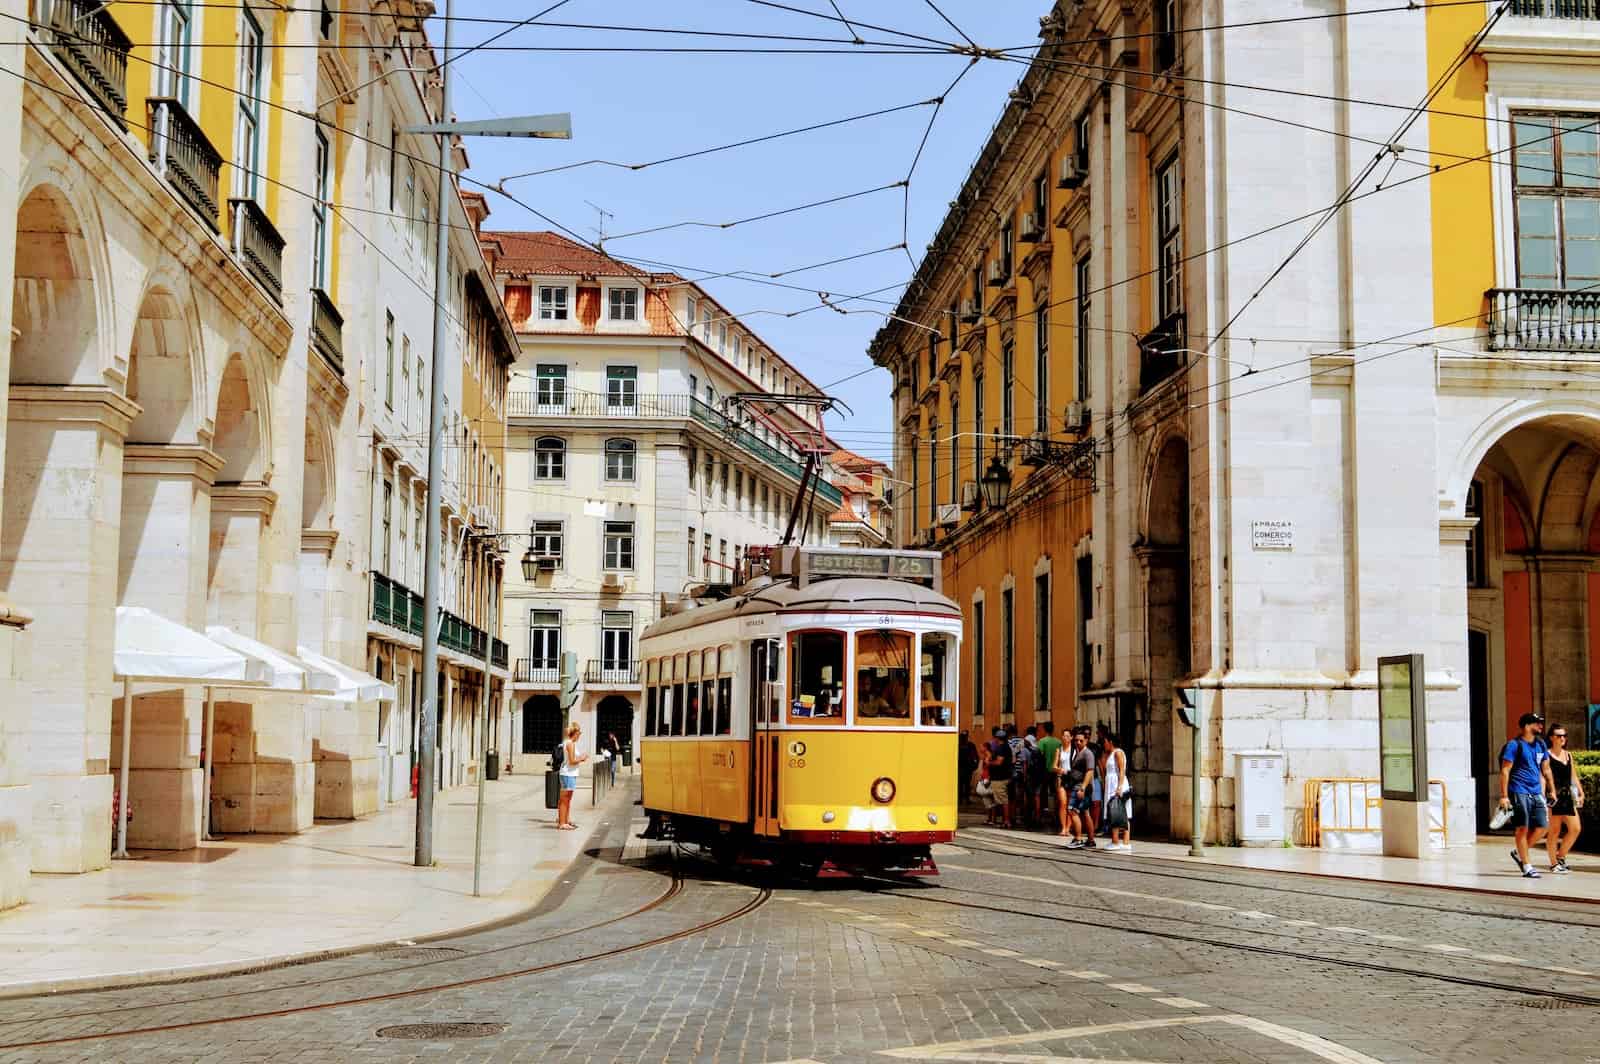 Image of one of Lisbon's iconic yellow tram cars driving through a cobblestone street line with yellow and white buildings.